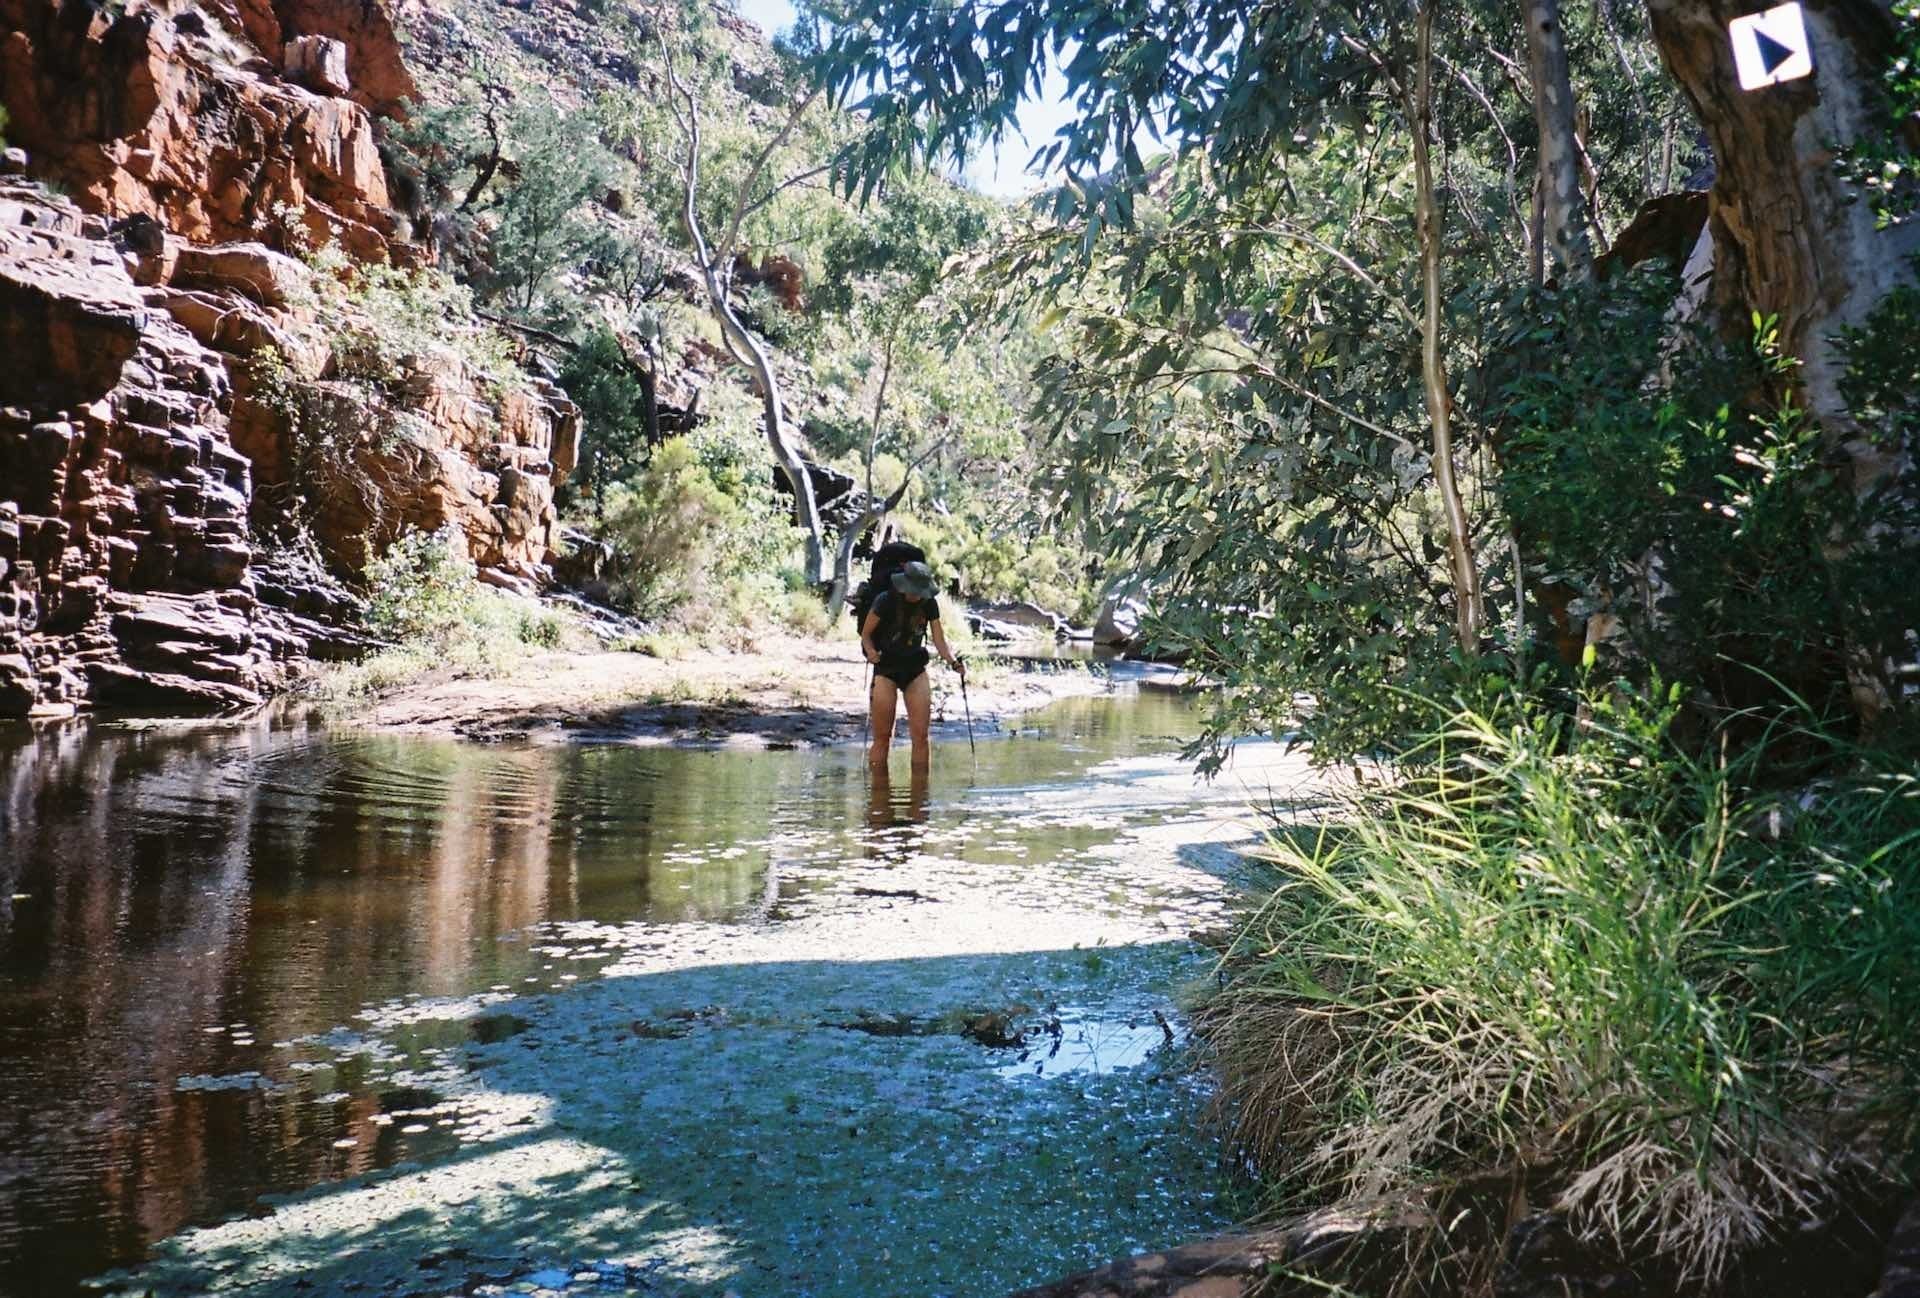 10 Things You Need to Know Before Hiking The Larapinta Trail, Ruby Claire, Central Australia, gorge, river, woman, hike, wade, hiking poles